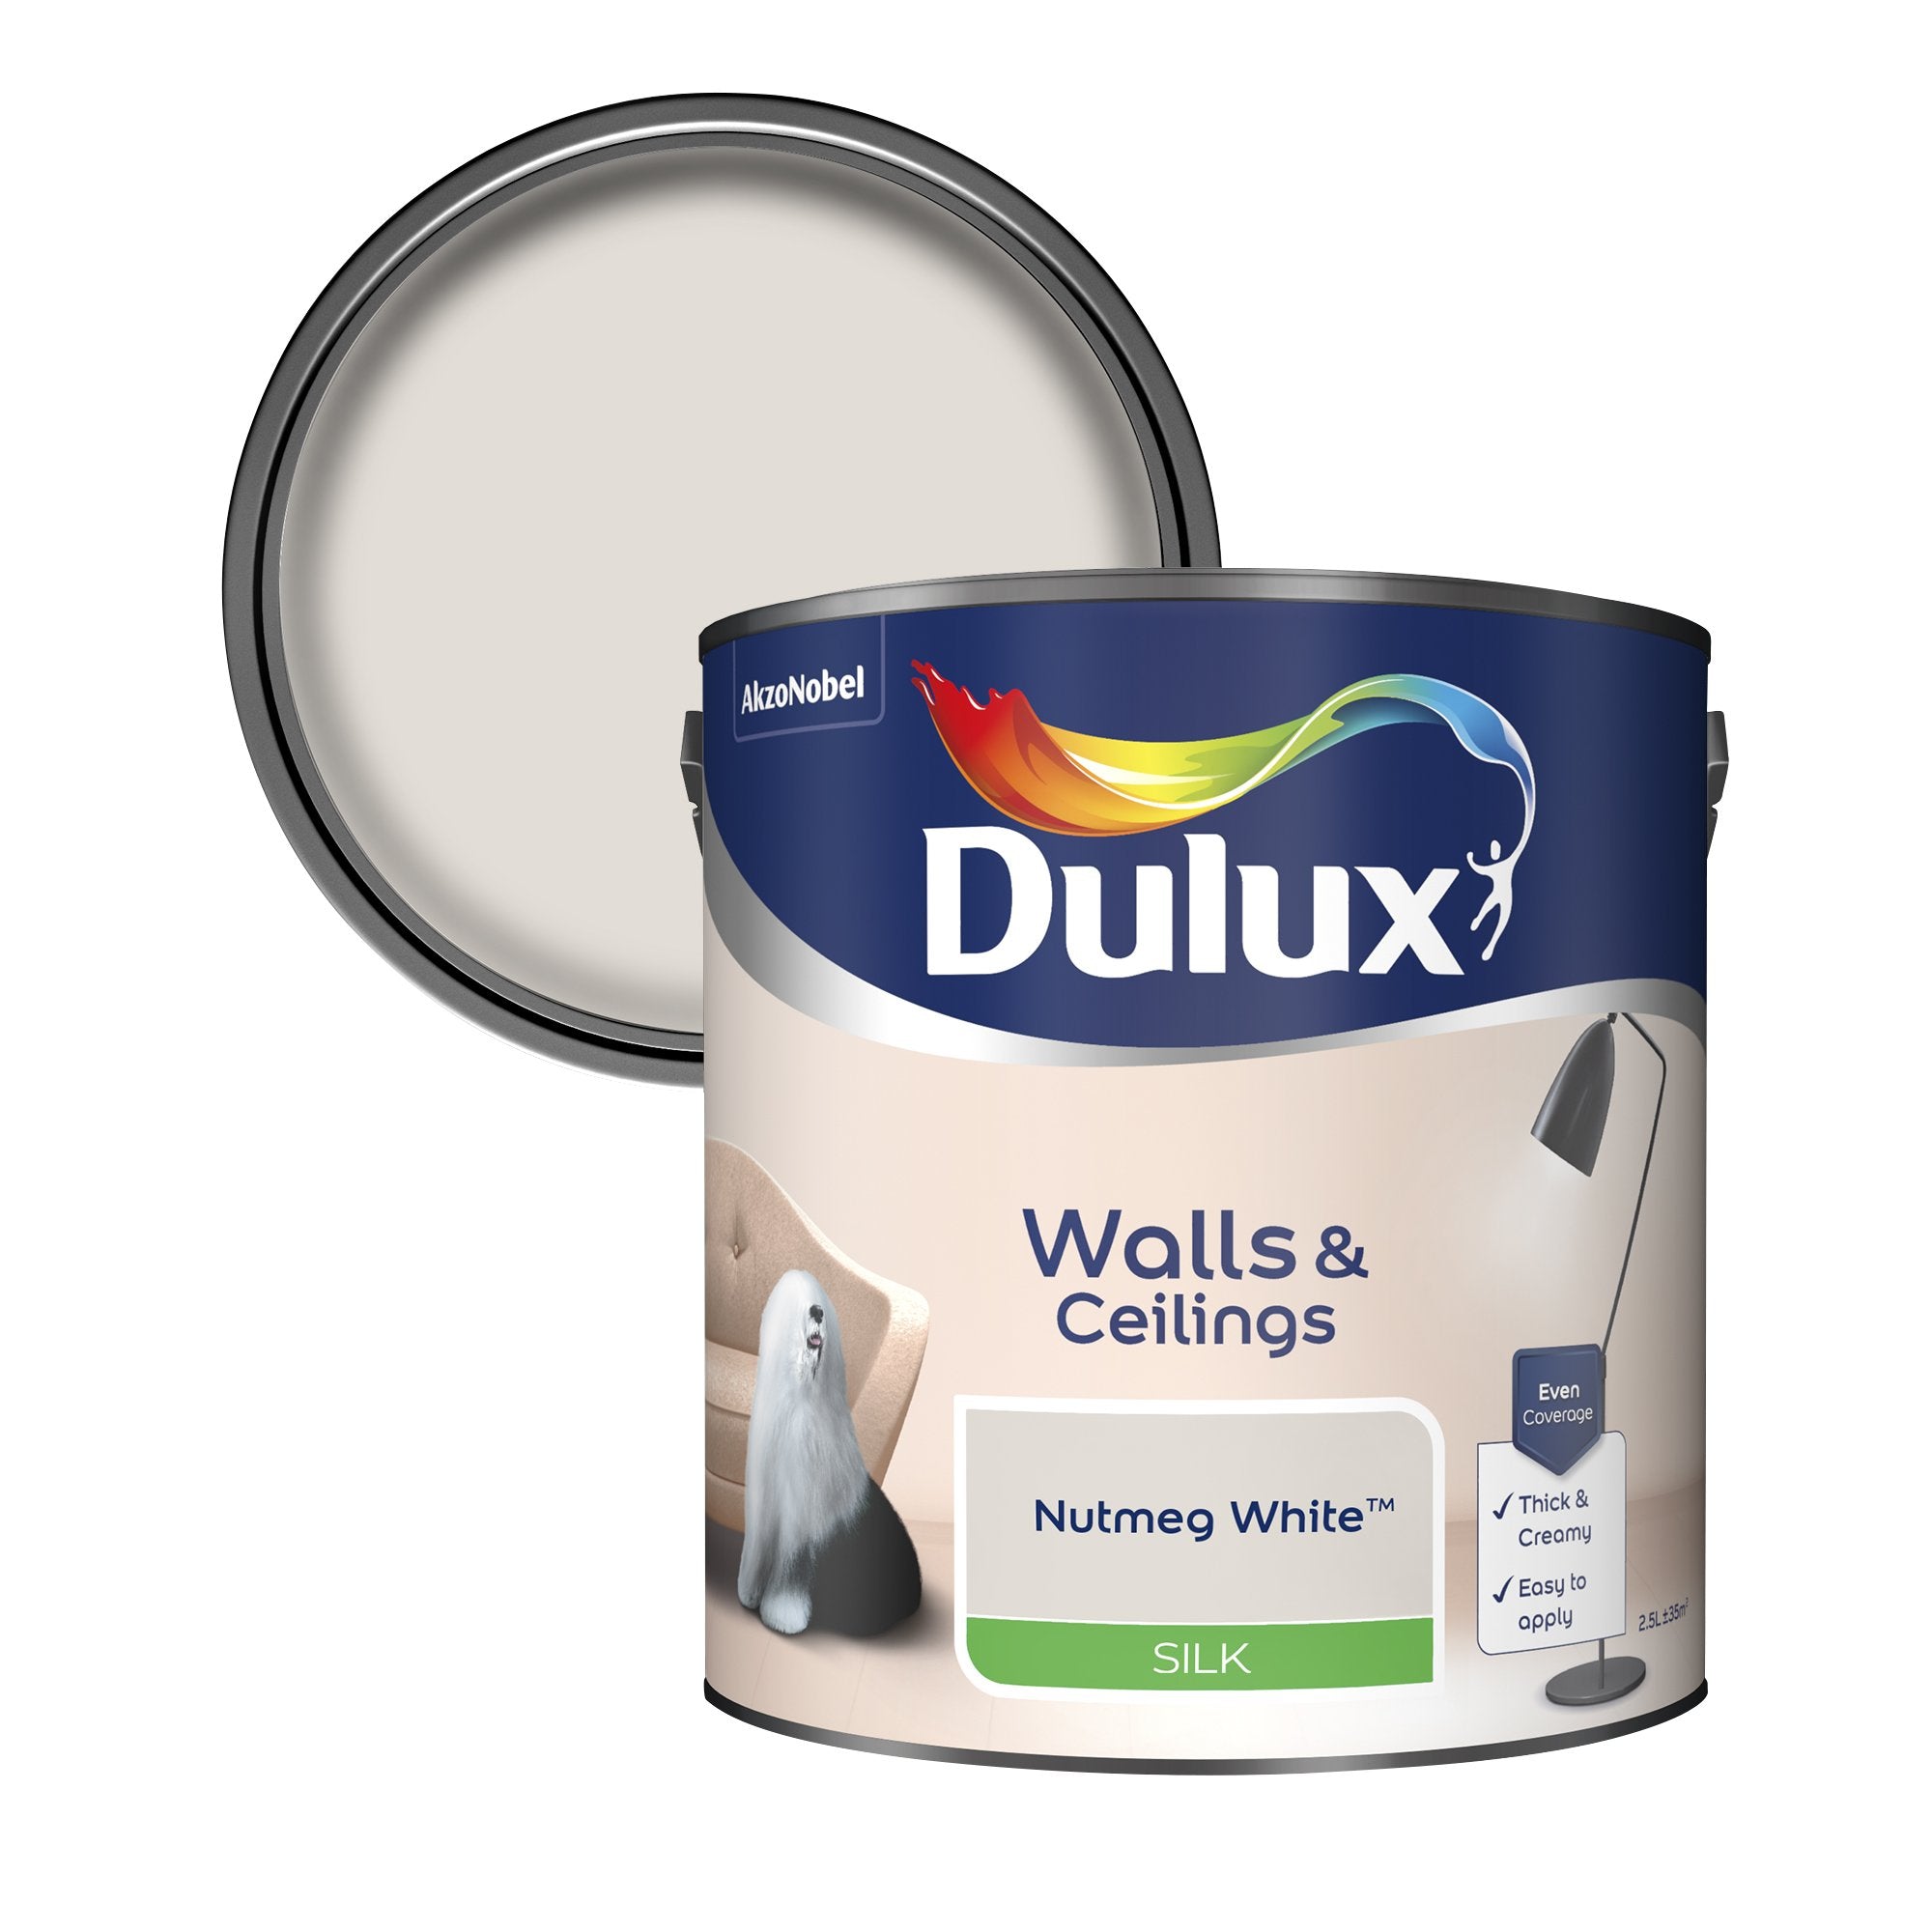 Dulux-Silk-Emulsion-Paint-For-Walls-And-Ceilings-Nutmeg-White-2.5L